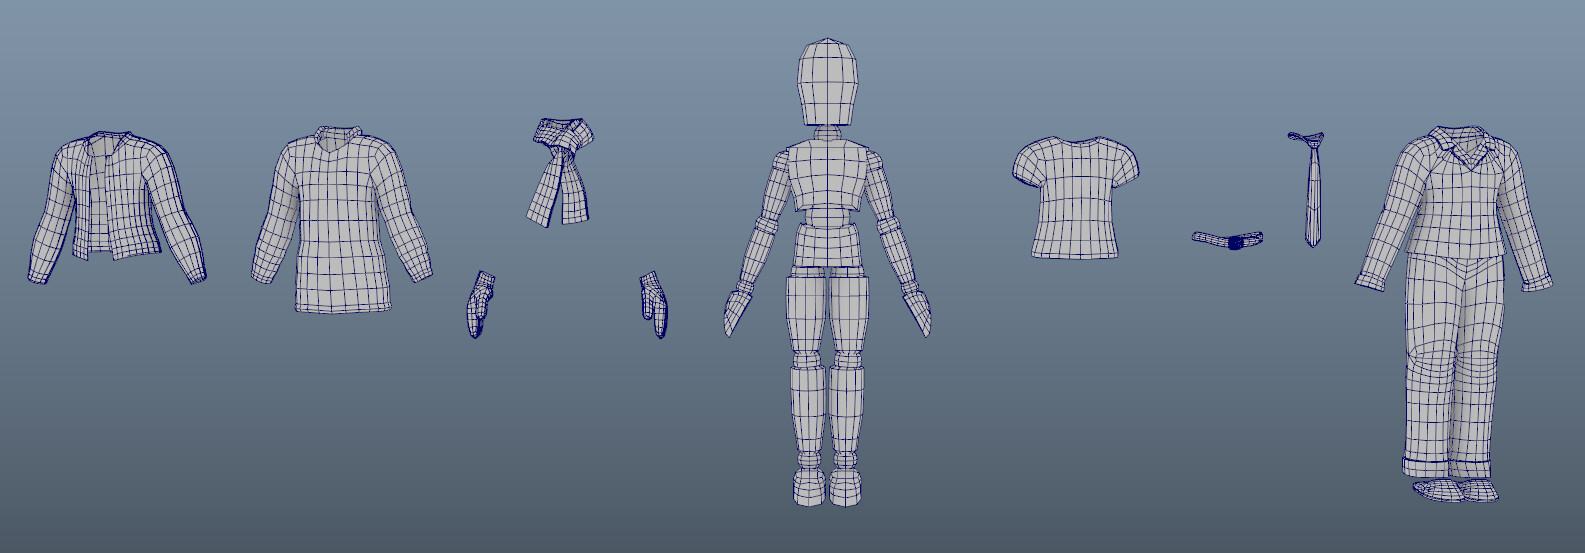 Clothing model wireframes